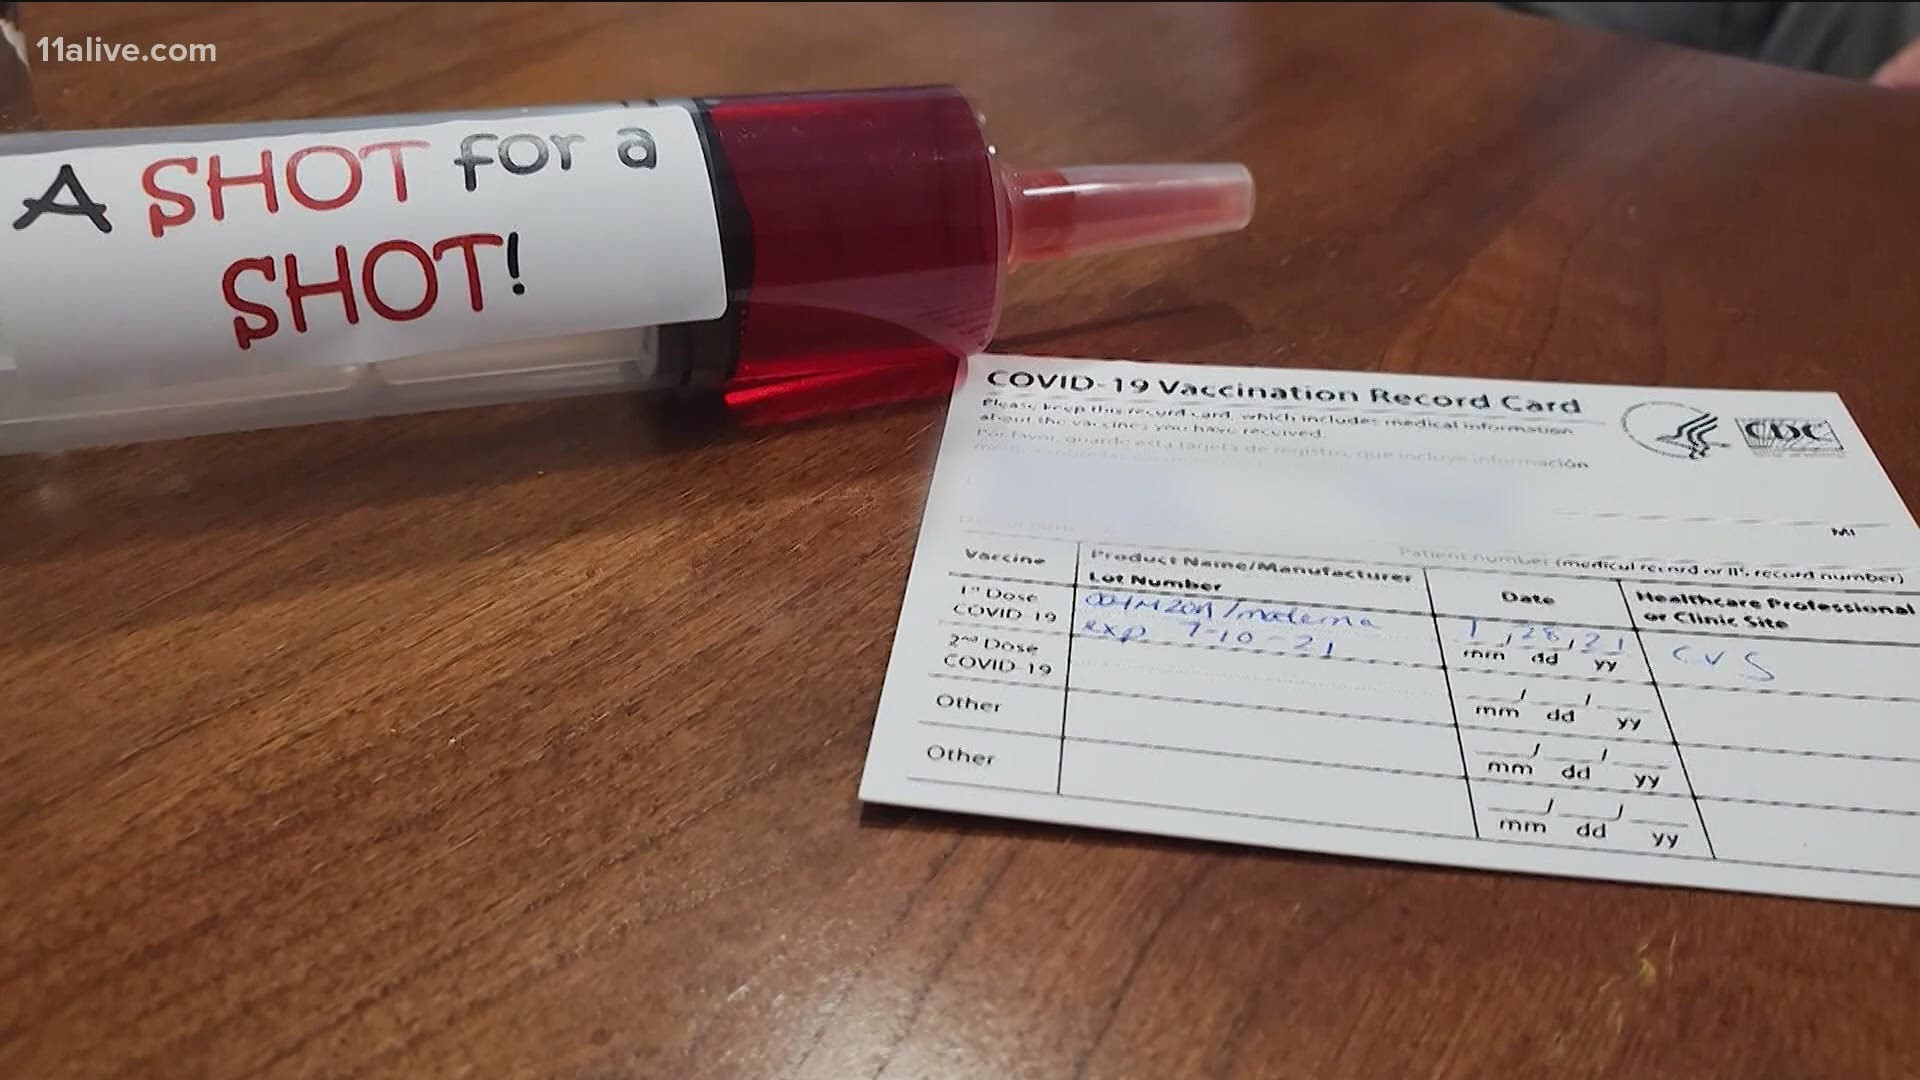 Your vaccine card includes your name, birthday and other important information.